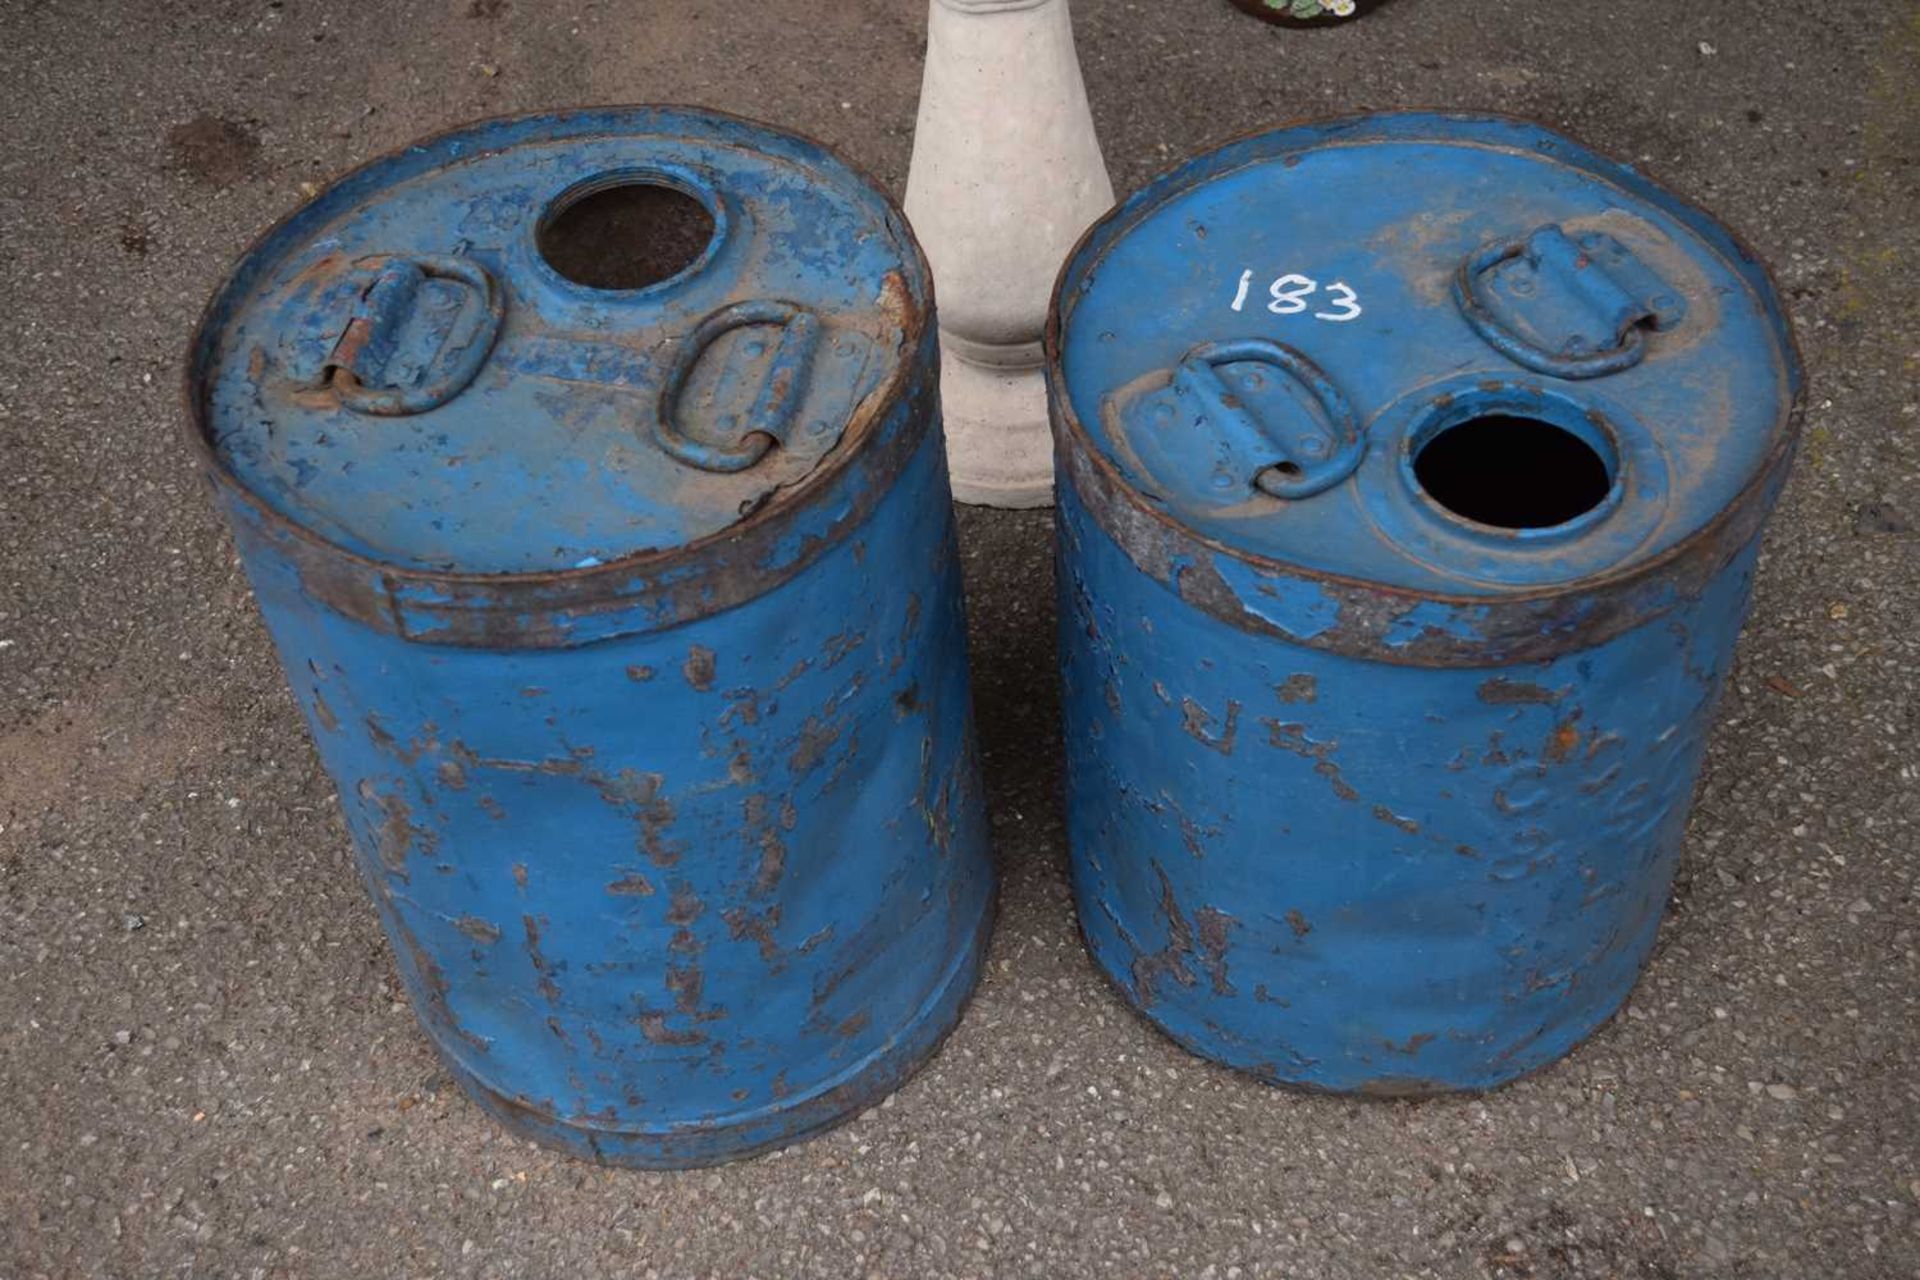 Two vintage metal containers/jerry cans